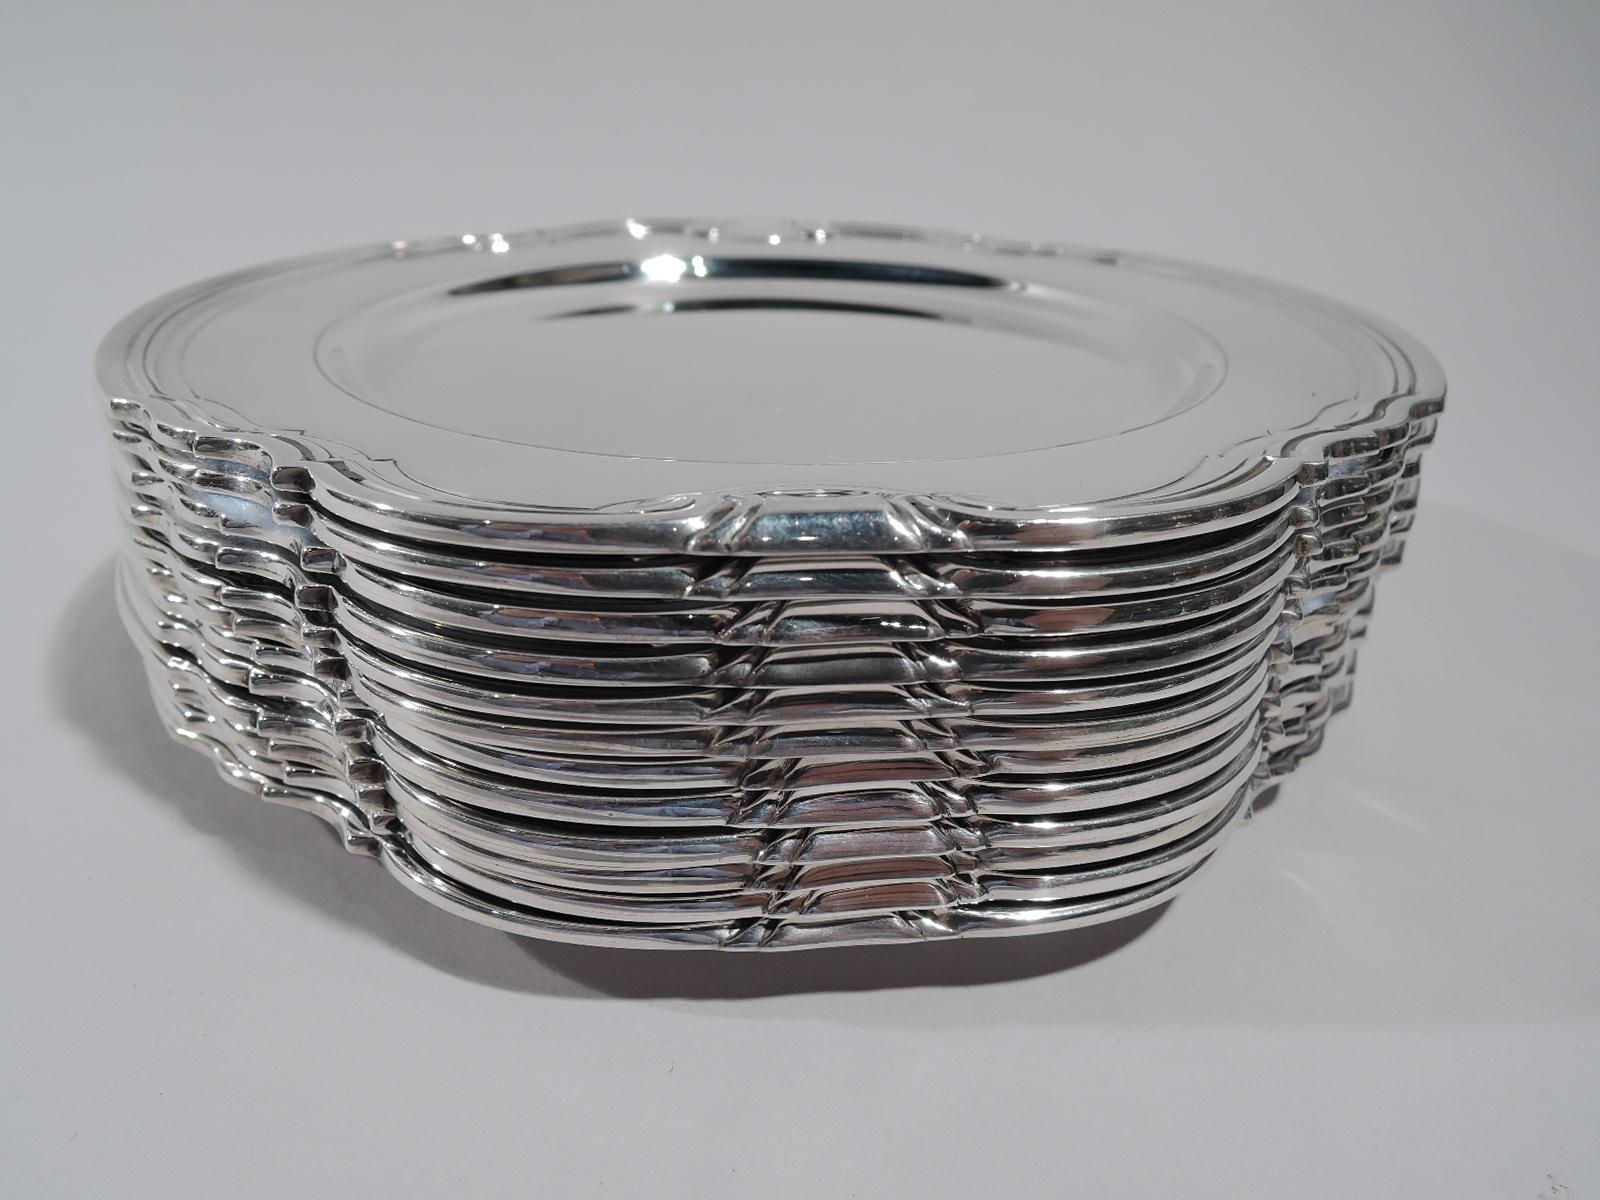 Set of 12 Castilian sterling silver bread and butter plates. Made by Tiffany & Co. in New York, circa 1929. Round with deep well. Shaped and molded rim with stylized volute scrolls. Super stylish in a less well-known Art Deco pattern. Fully marked